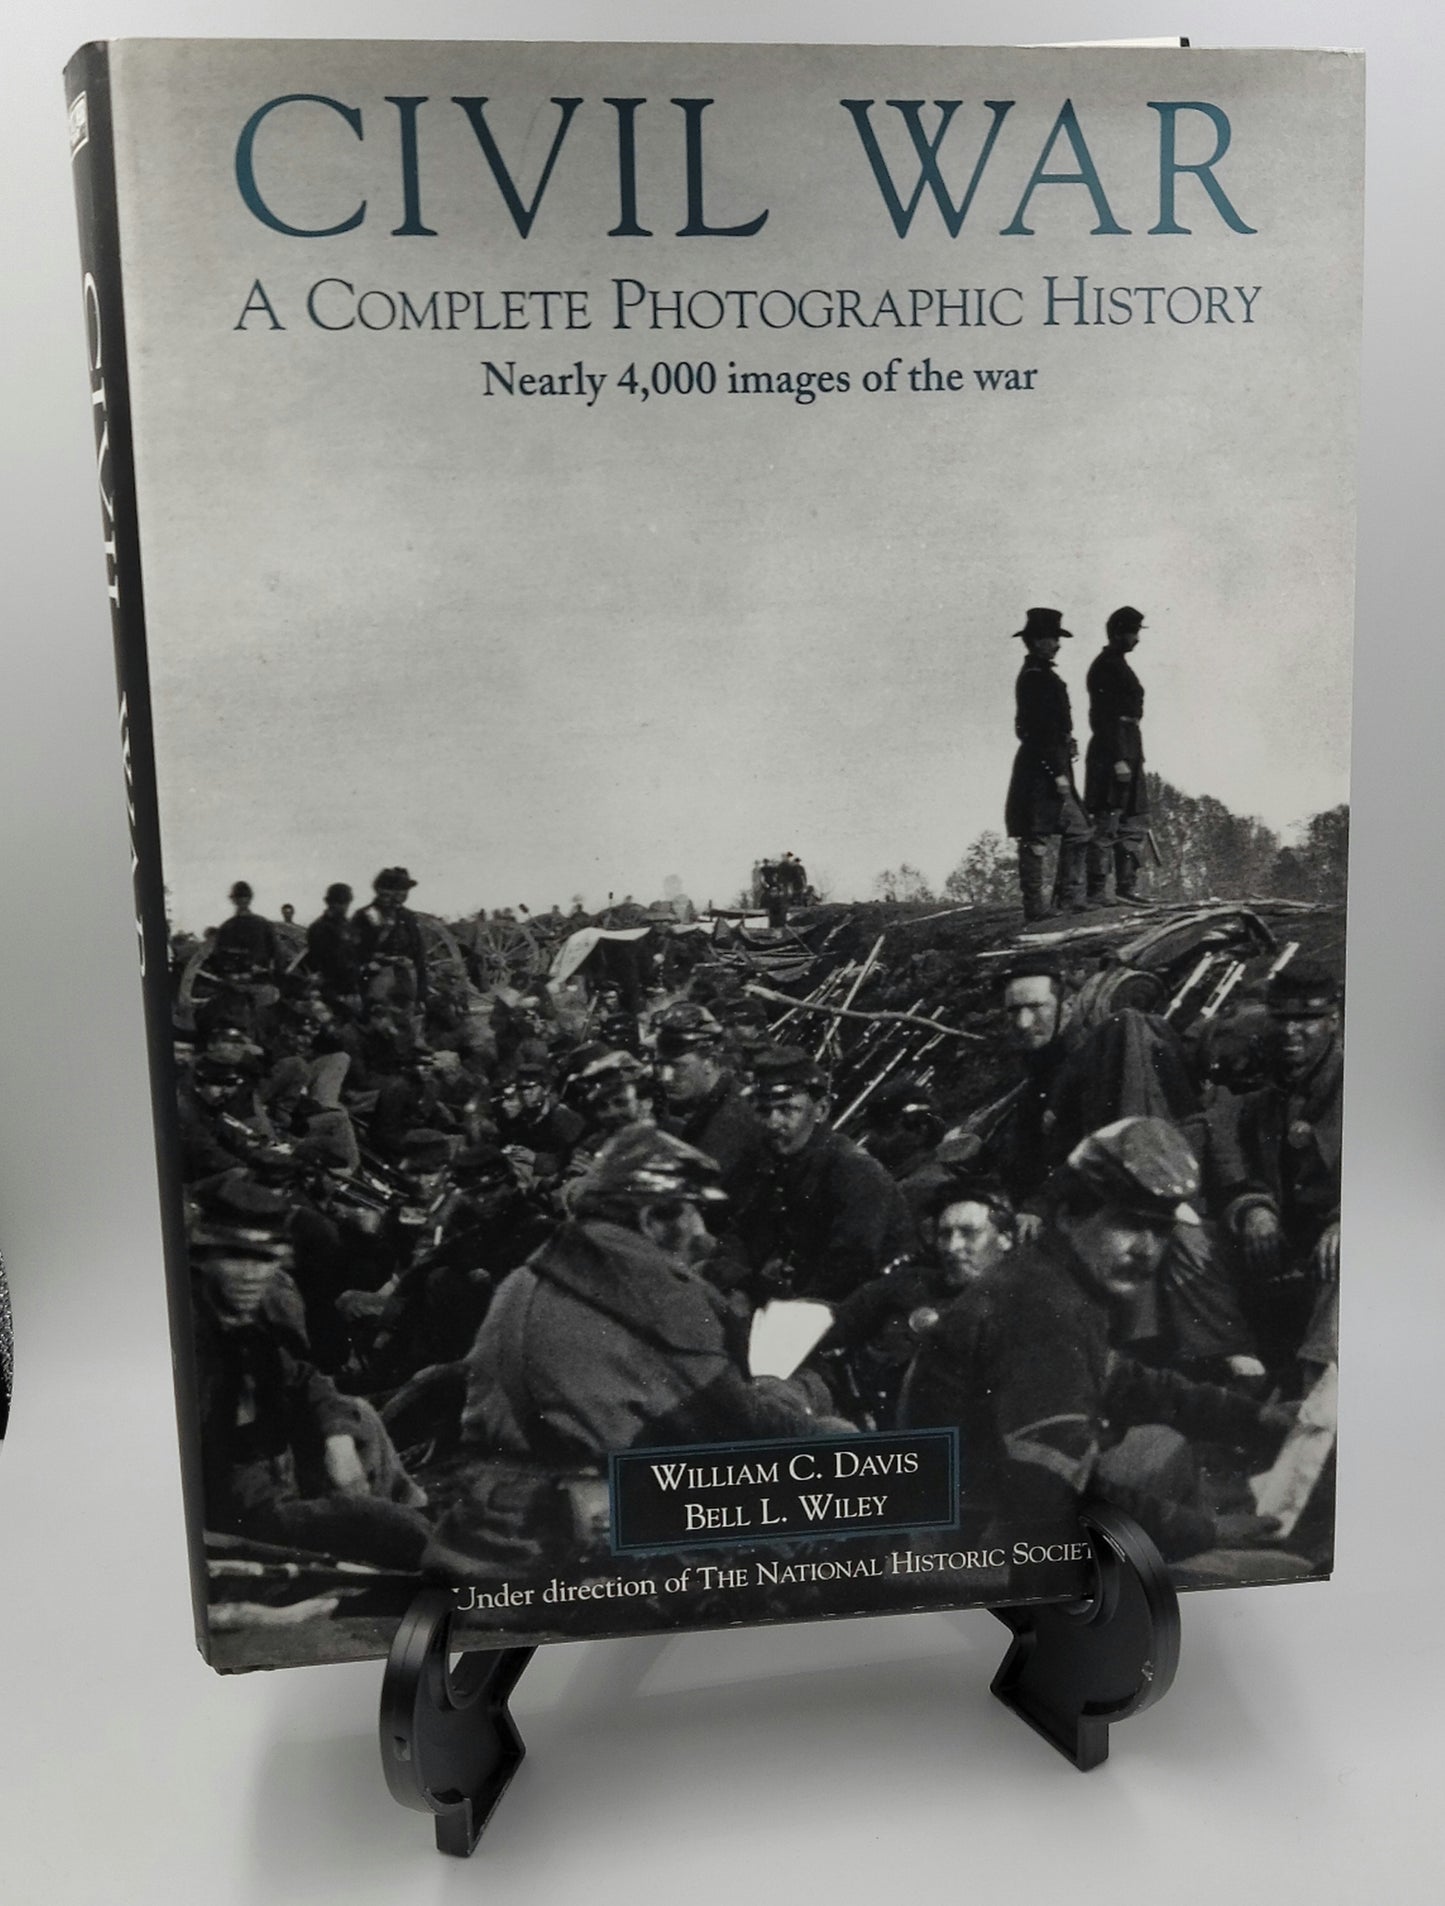 Civil War A Complete Photographic History by William C. Davis and Bell L. Wiley